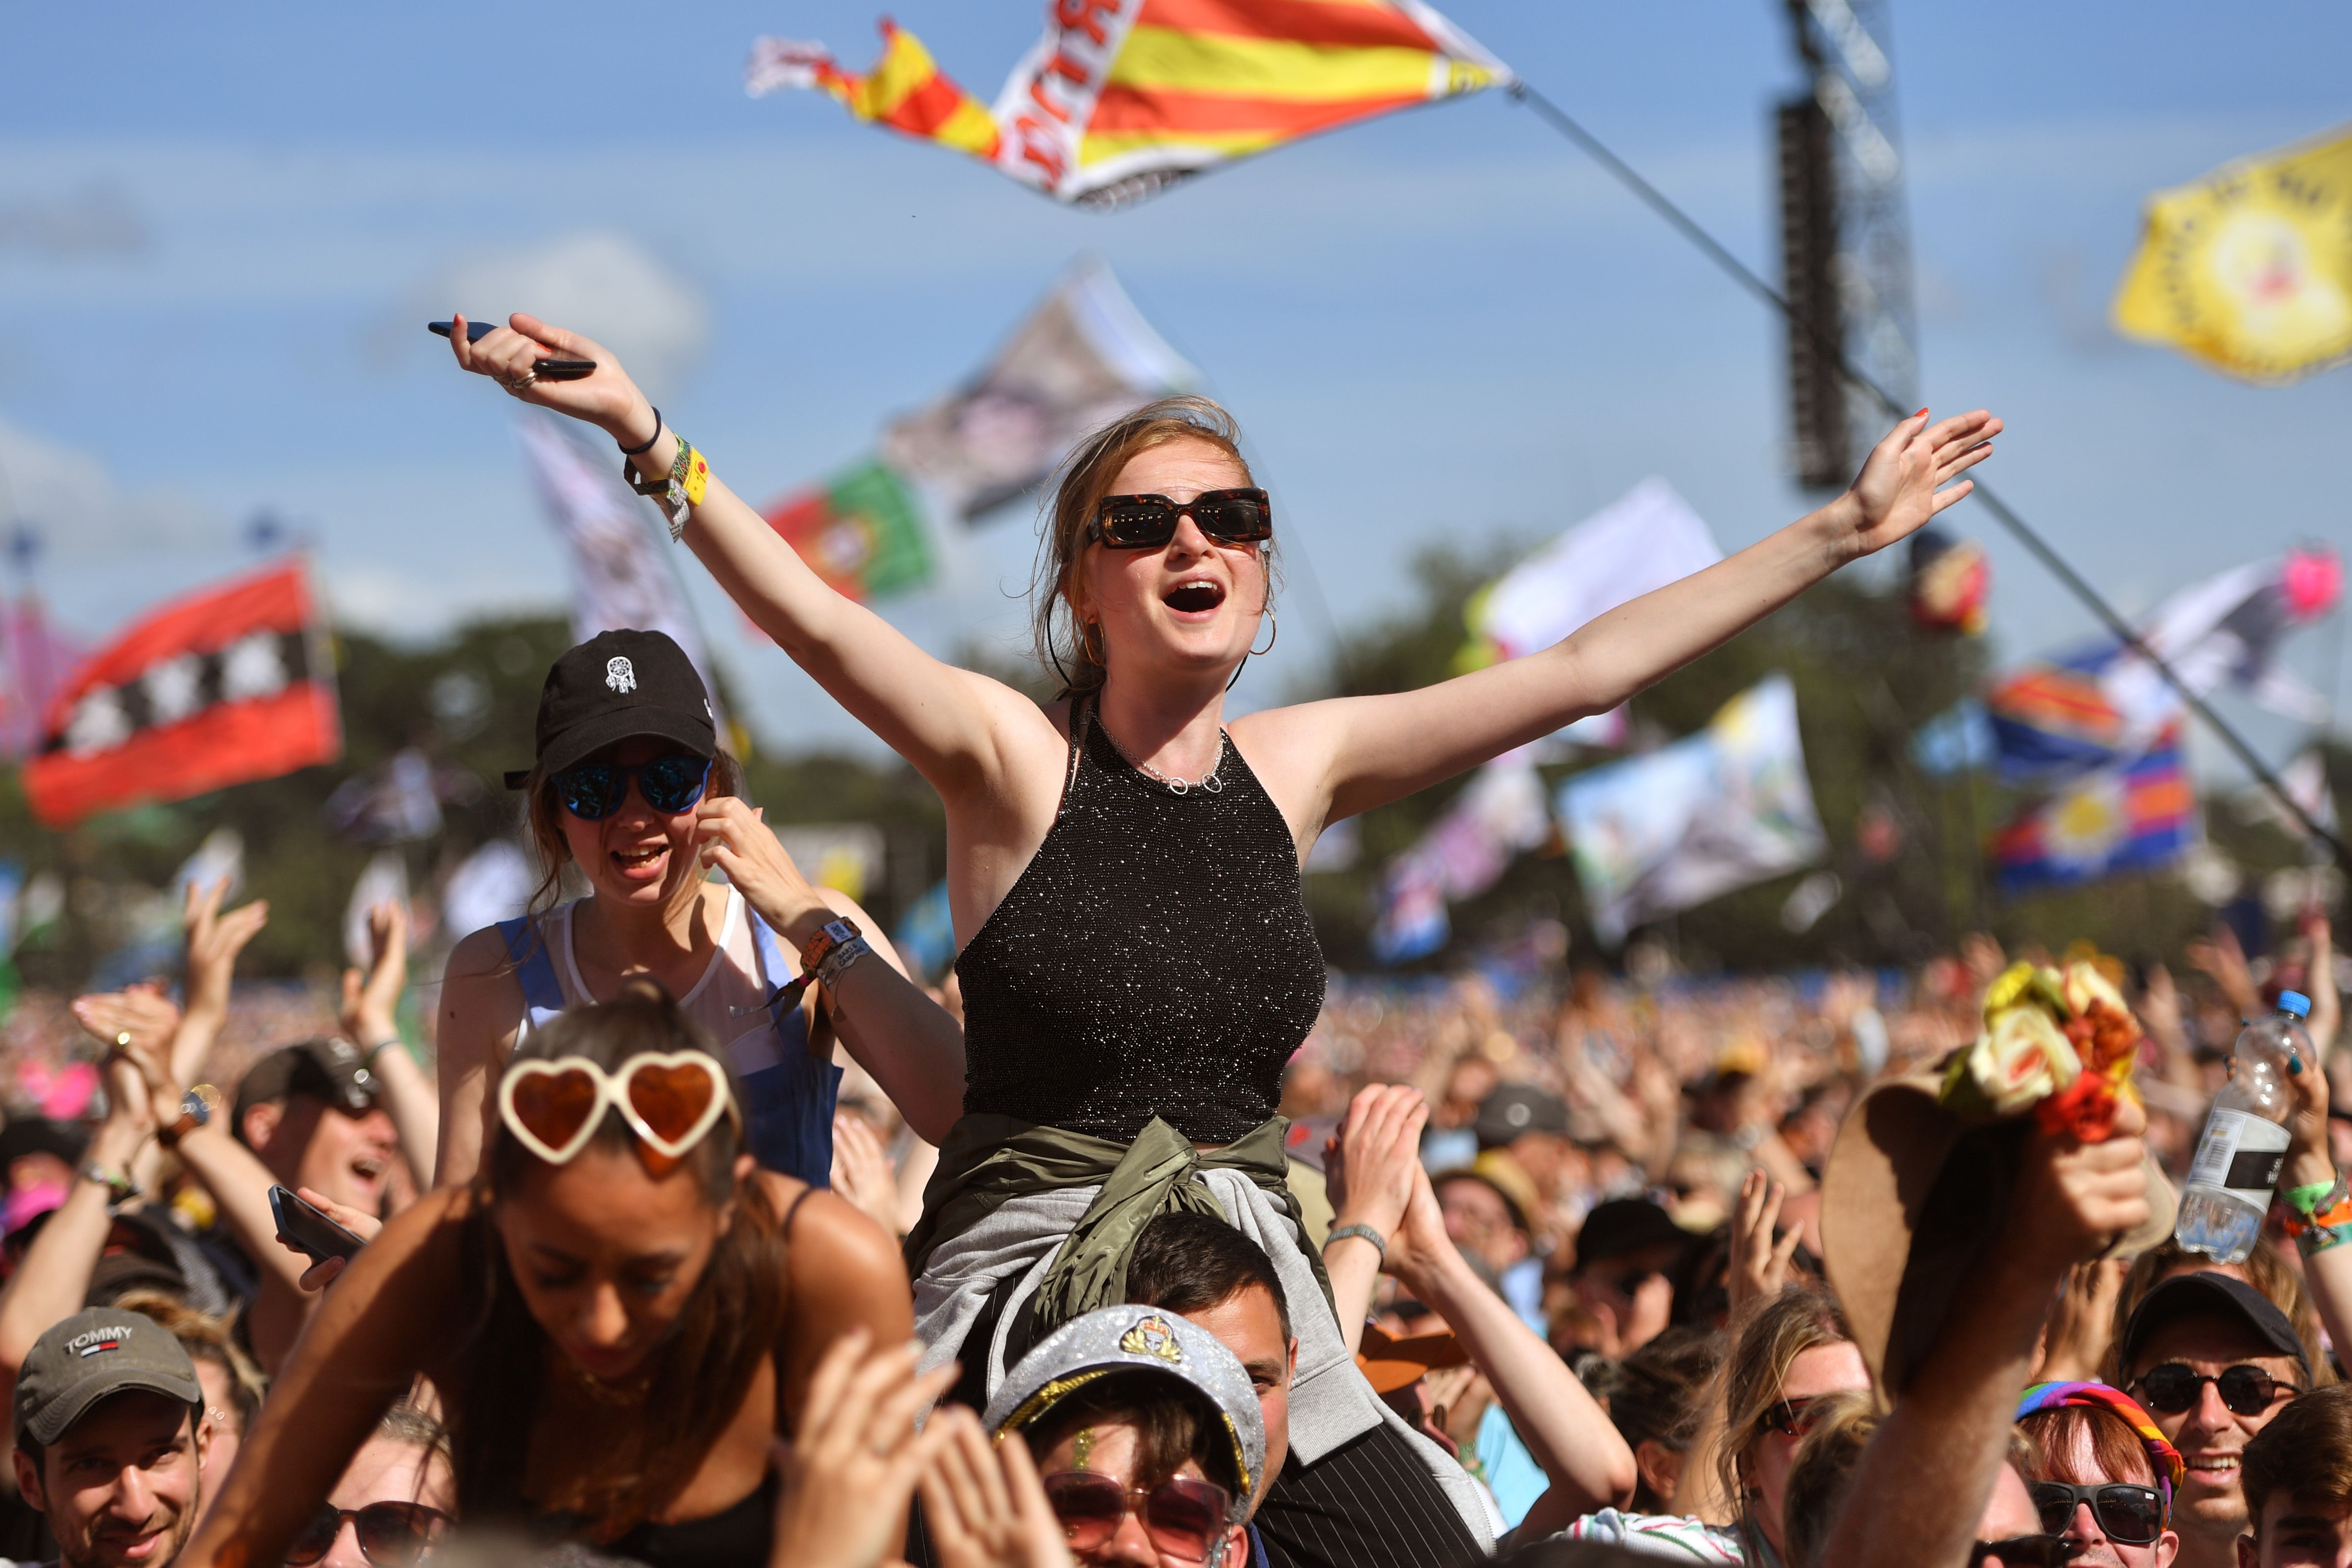 Glastonbury Festival 2023: Full line-up, tickets and how to watch